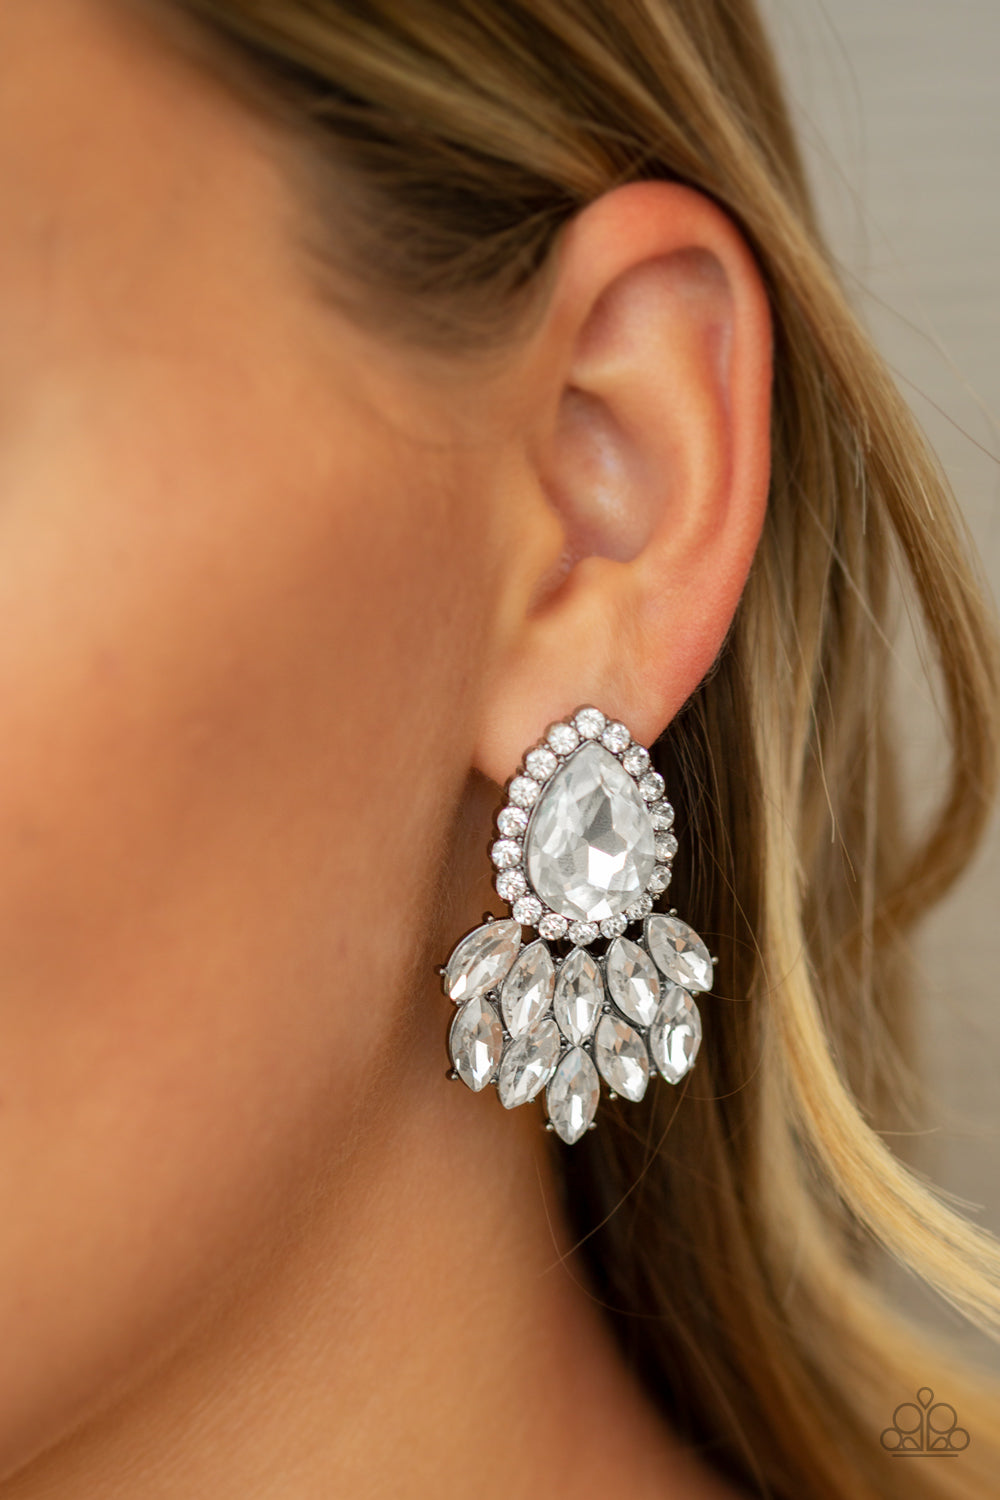 Paparazzi Accessories A Breath of Fresh Heir - White Earrings glassy white marquise style rhinestones cascade from the bottom of a dramatically oversized white teardrop gem, coalescing into a regal frame. Earring attaches to a standard post fitting.  Sold as one pair of post earrings.